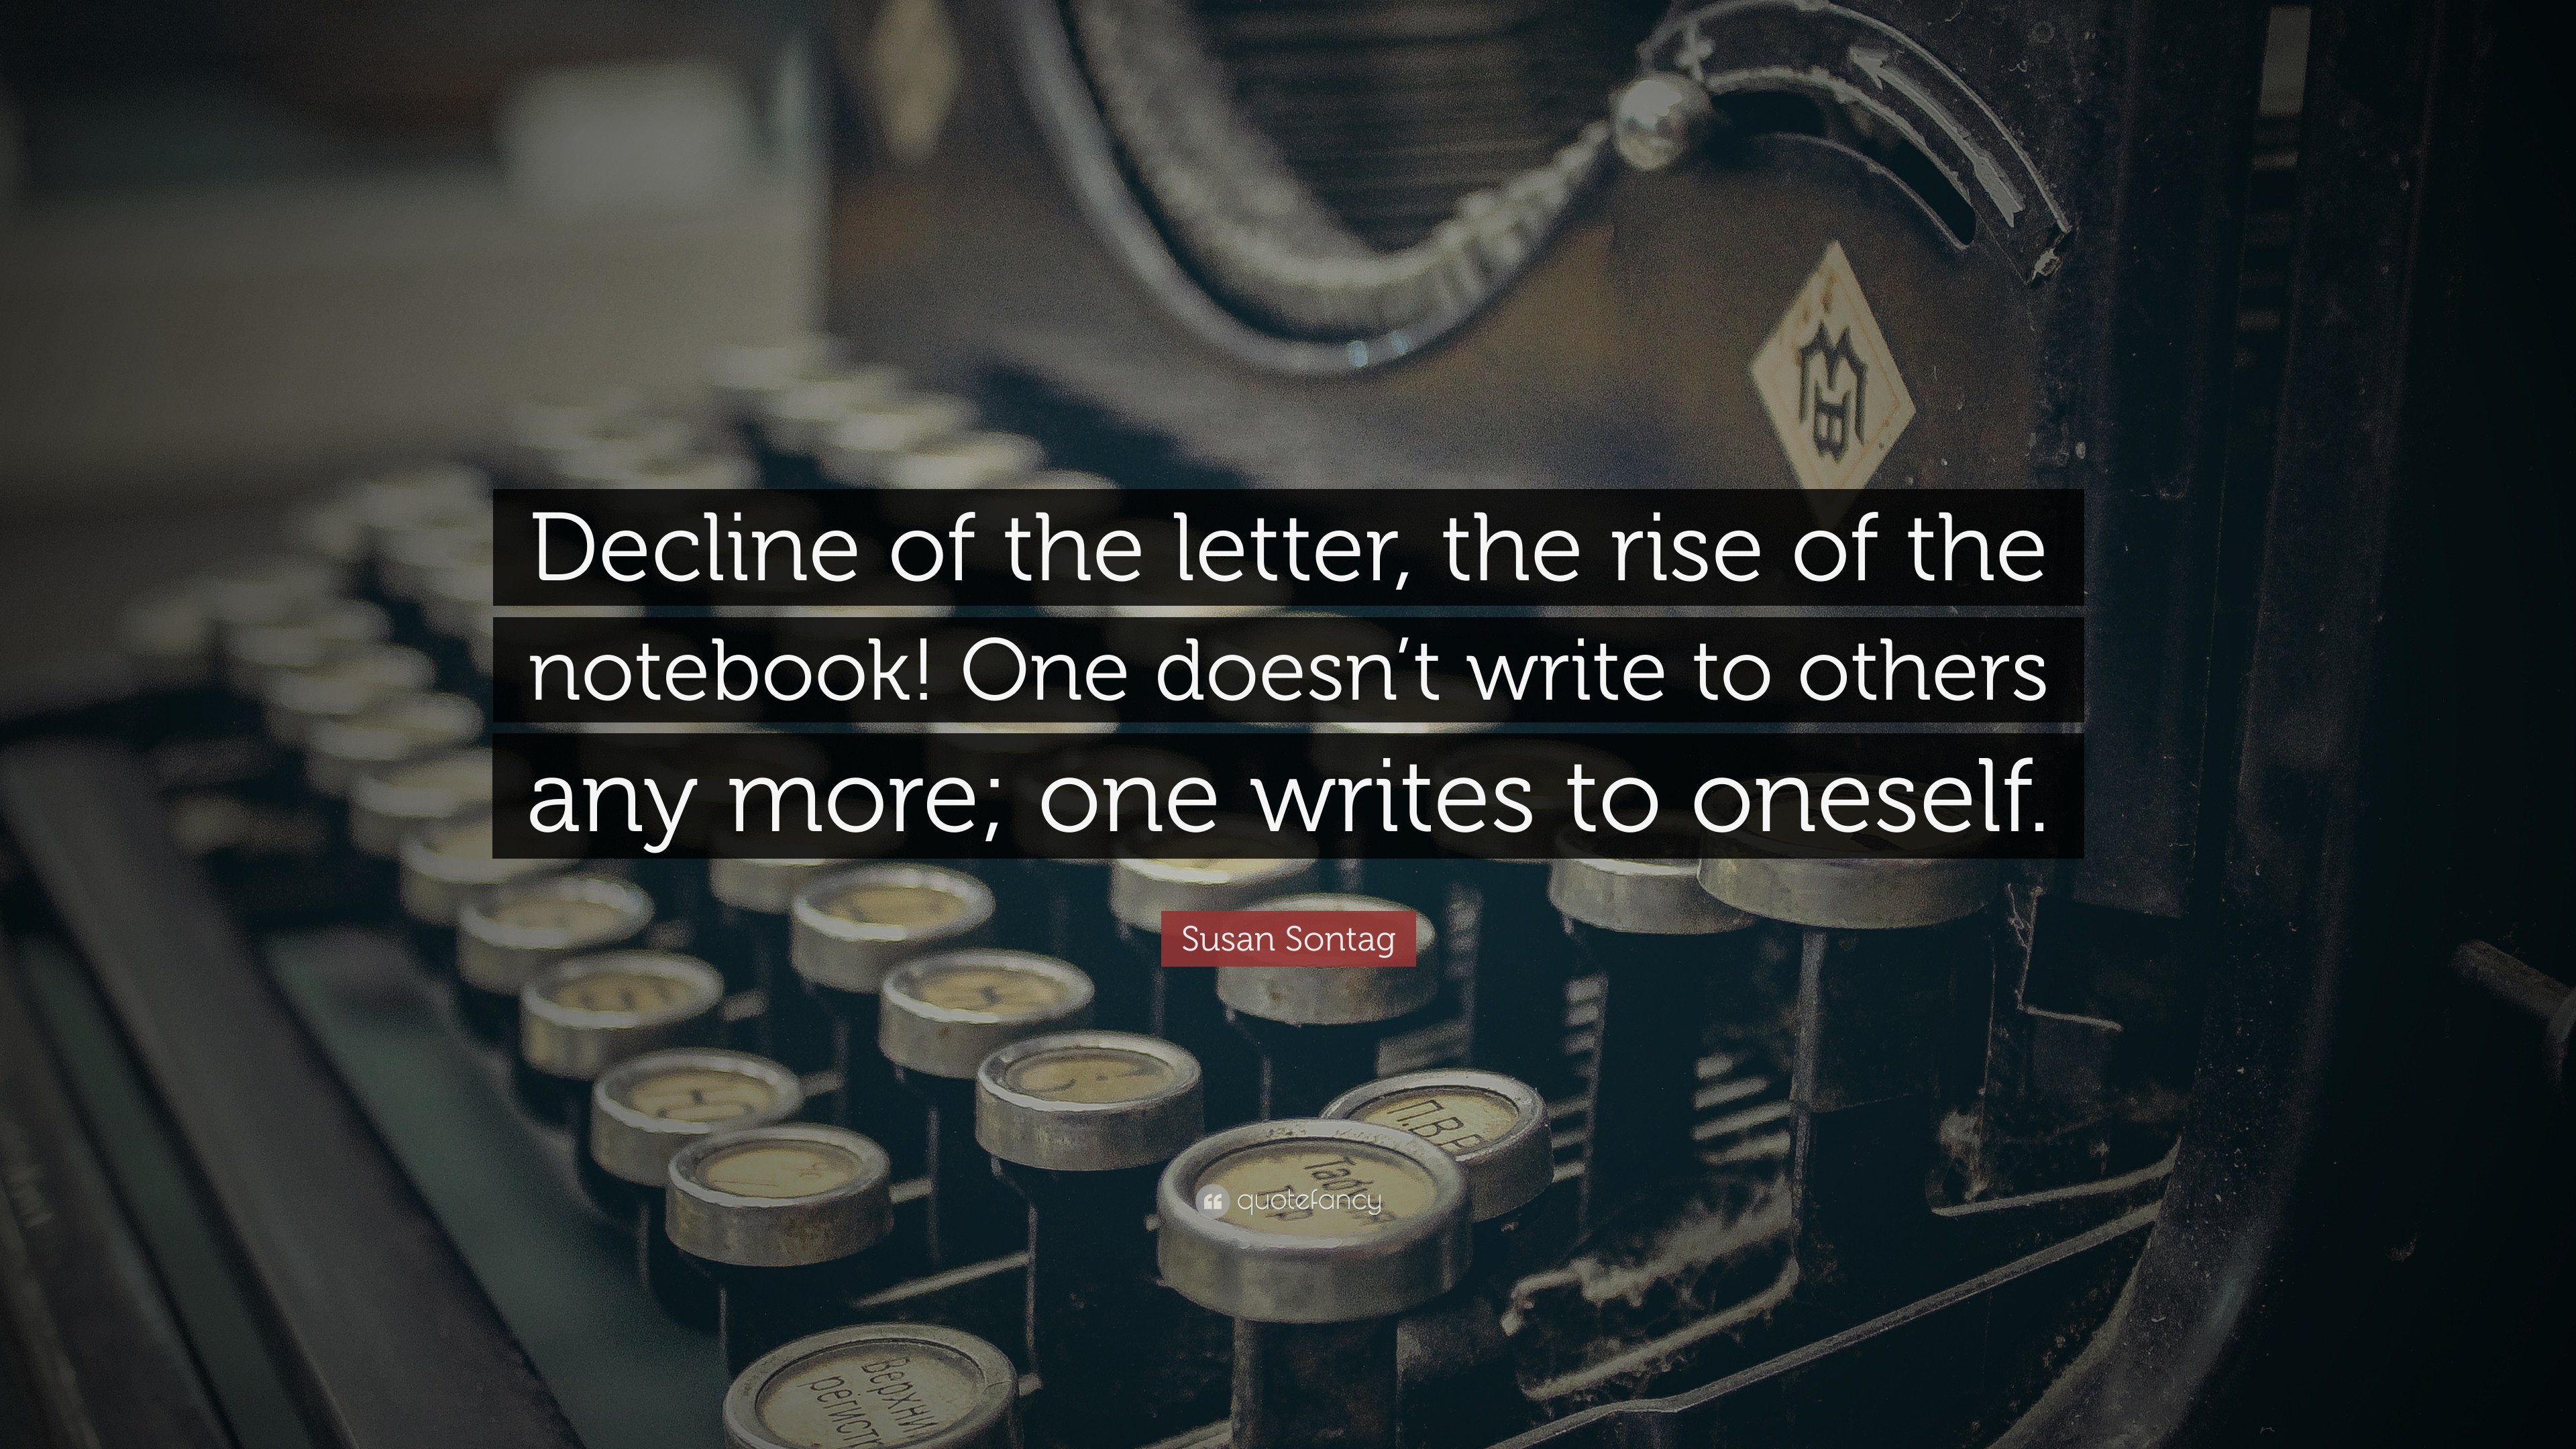 3840x2160 Susan Sontag Quote: “Decline of the letter, the rise of the notebook!